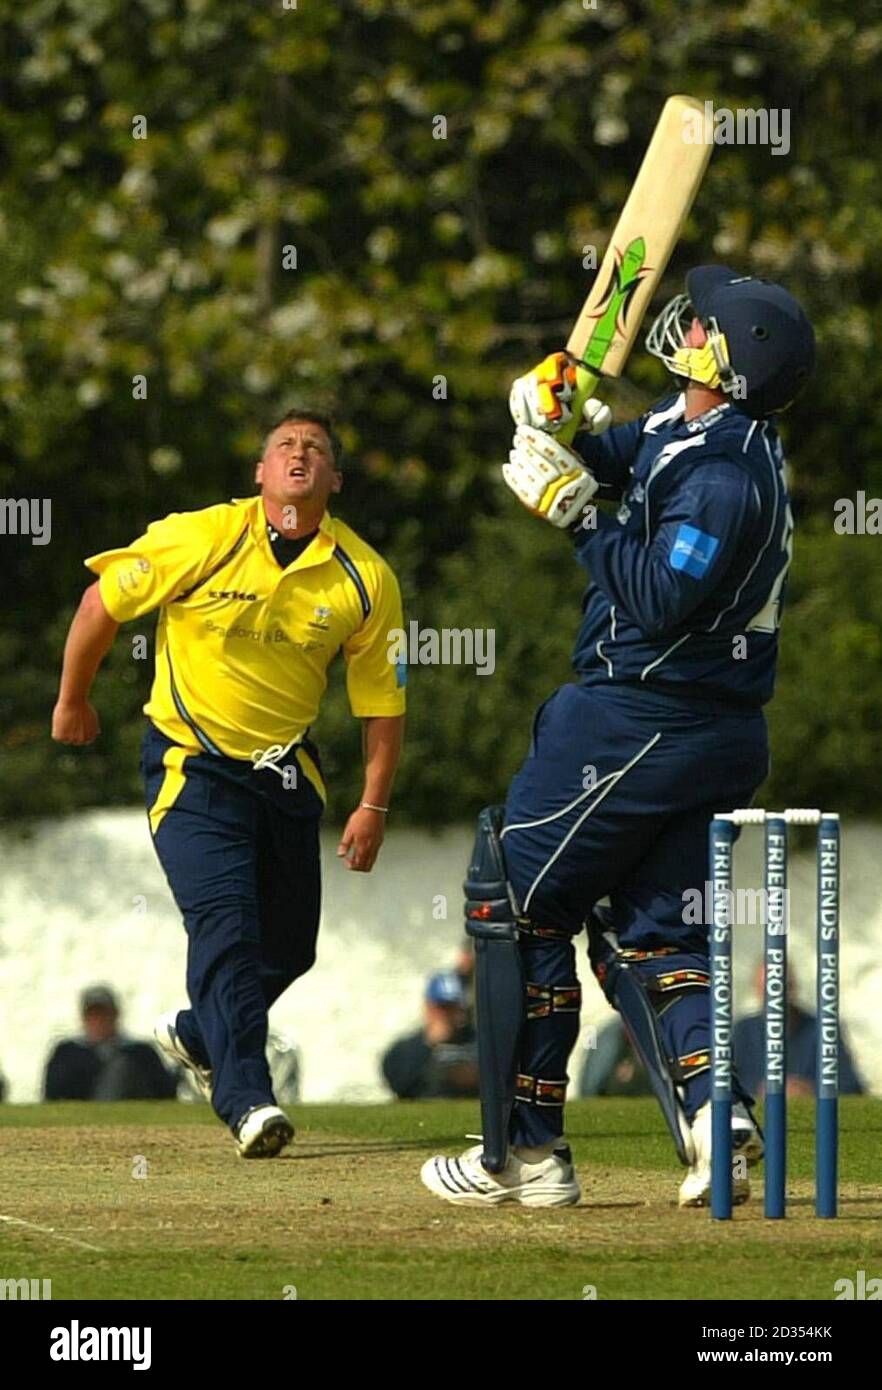 Scottish Saltires Captain Ryan Watson looks up as he is caught out from Yorkshire's Darren Gough's bowling during the Friends Provident Throphy Northern Conference match at Grange Club cricket Ground, Edinburgh. Stock Photo